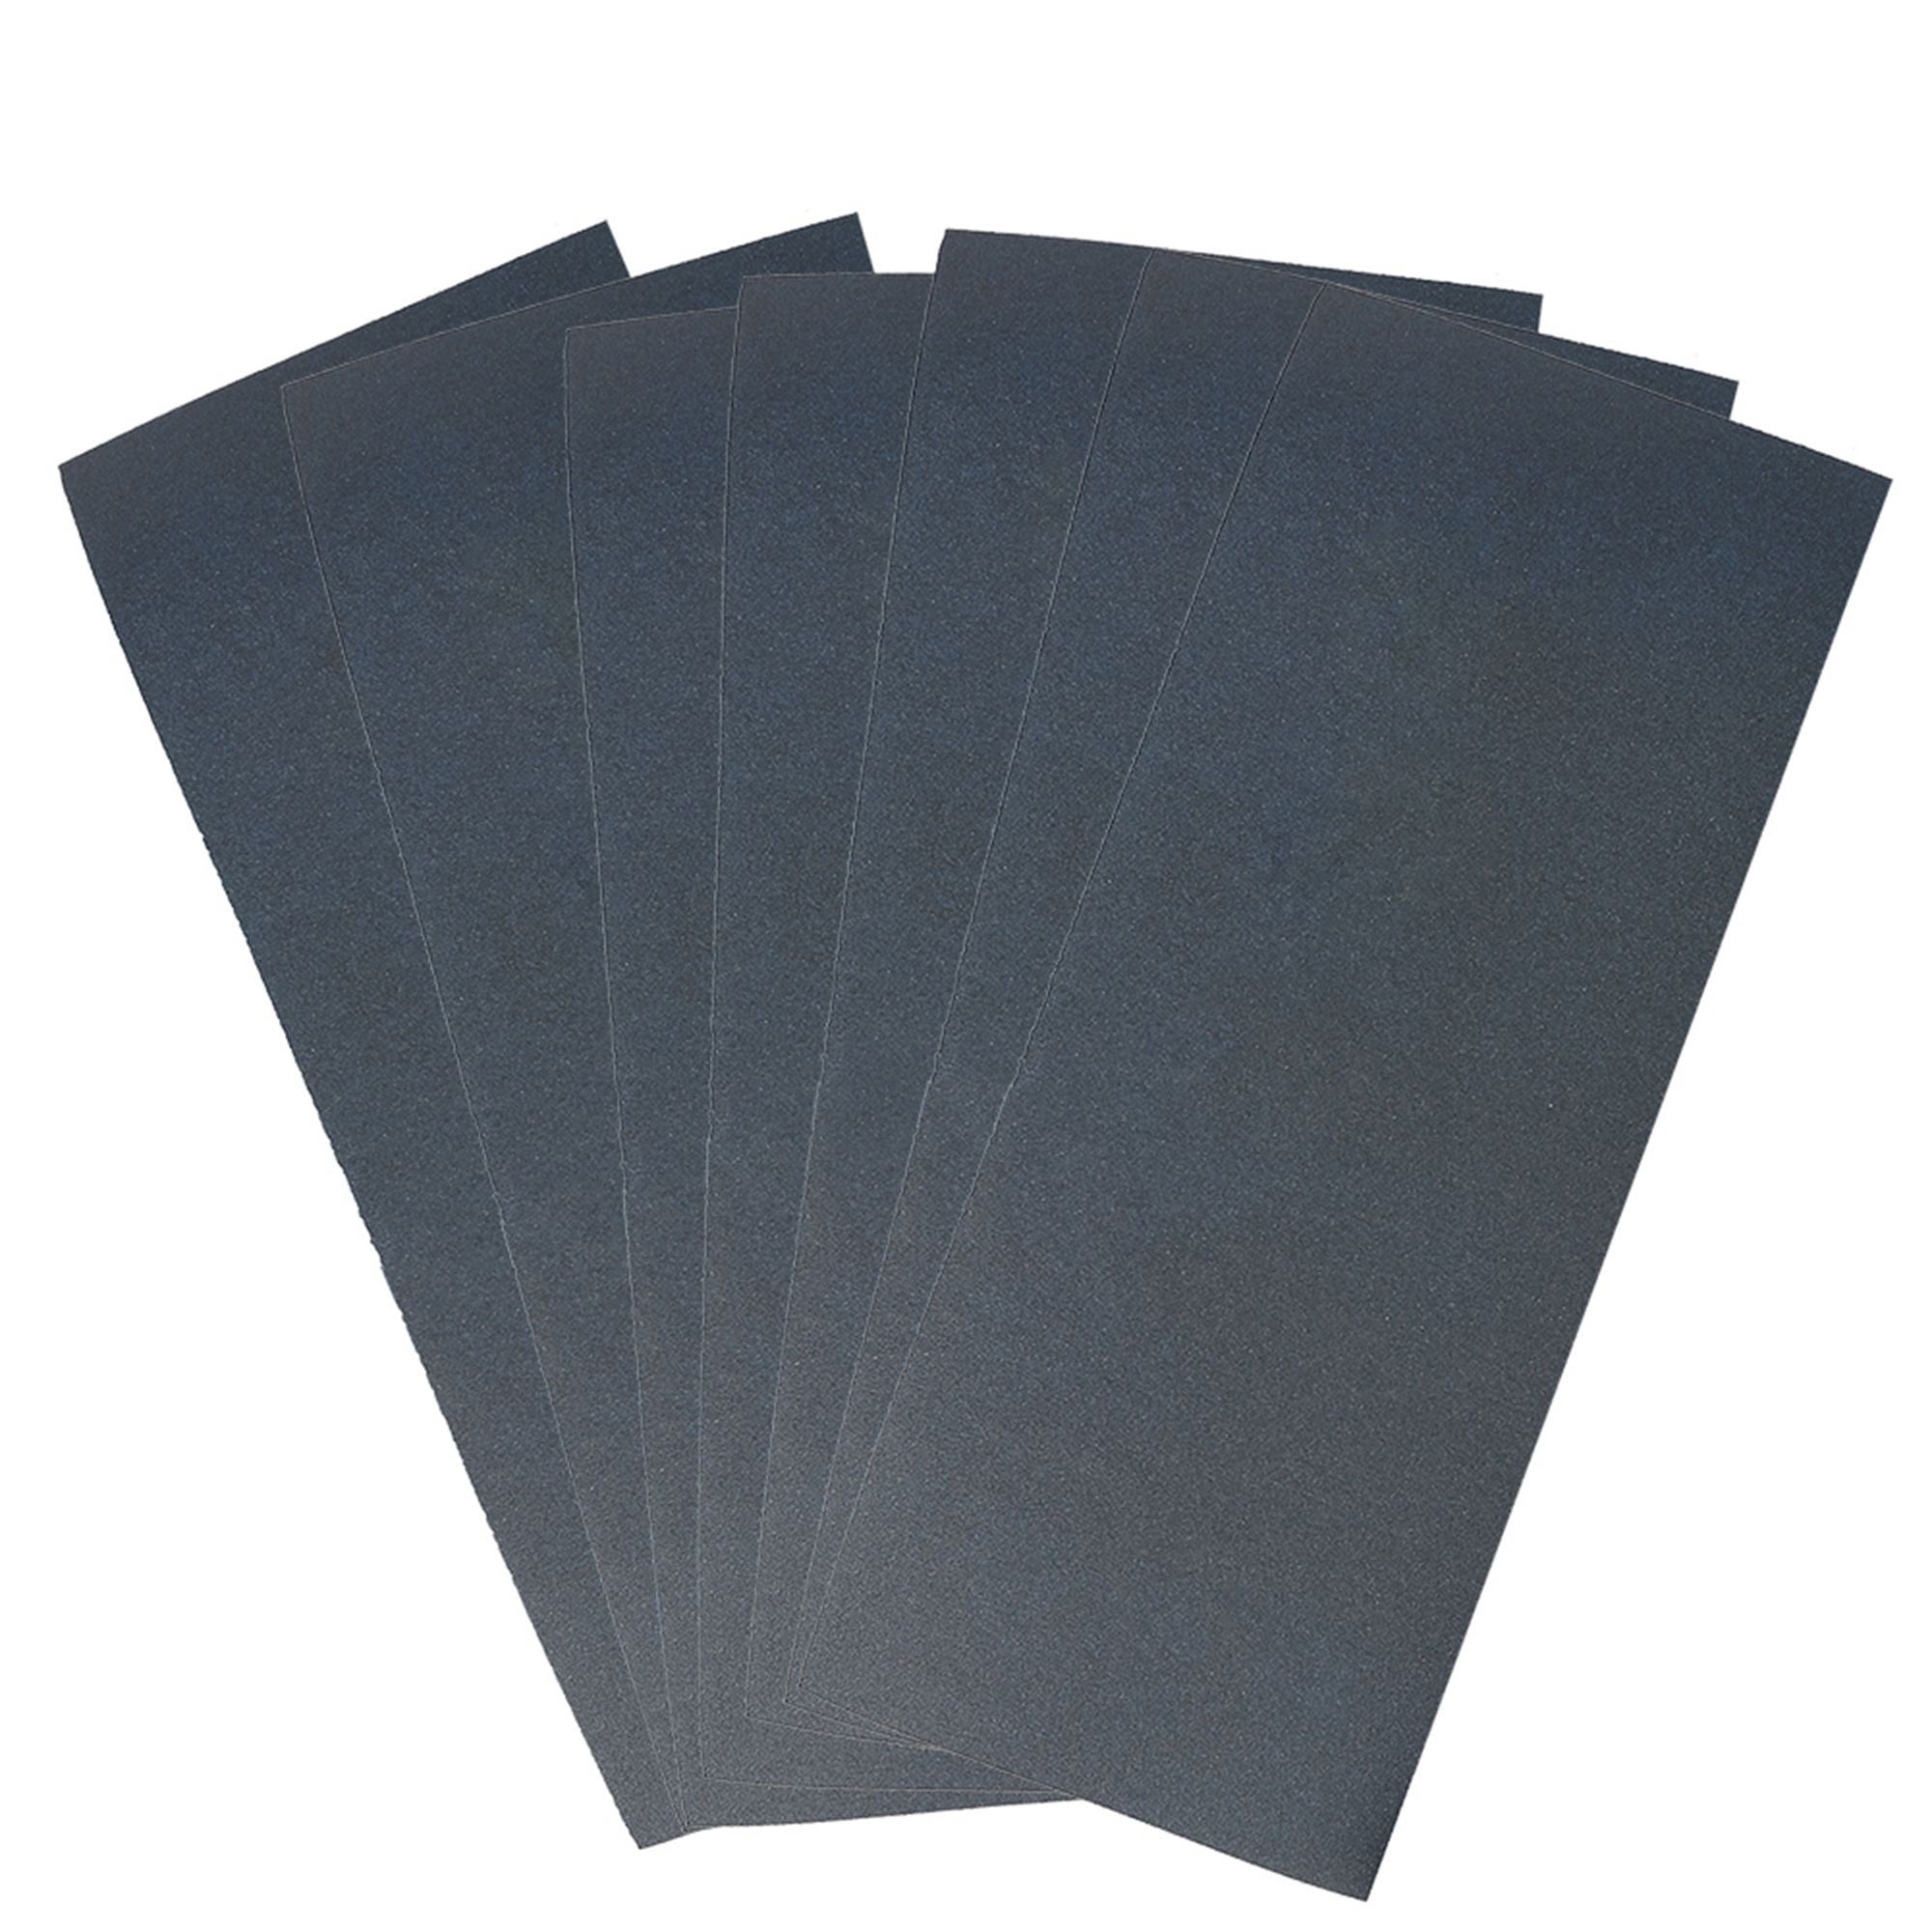 Details about   50x Sandpaper Sheets Sanding Paper Grit Wet & Dry for Wood Auto Metal Polishing